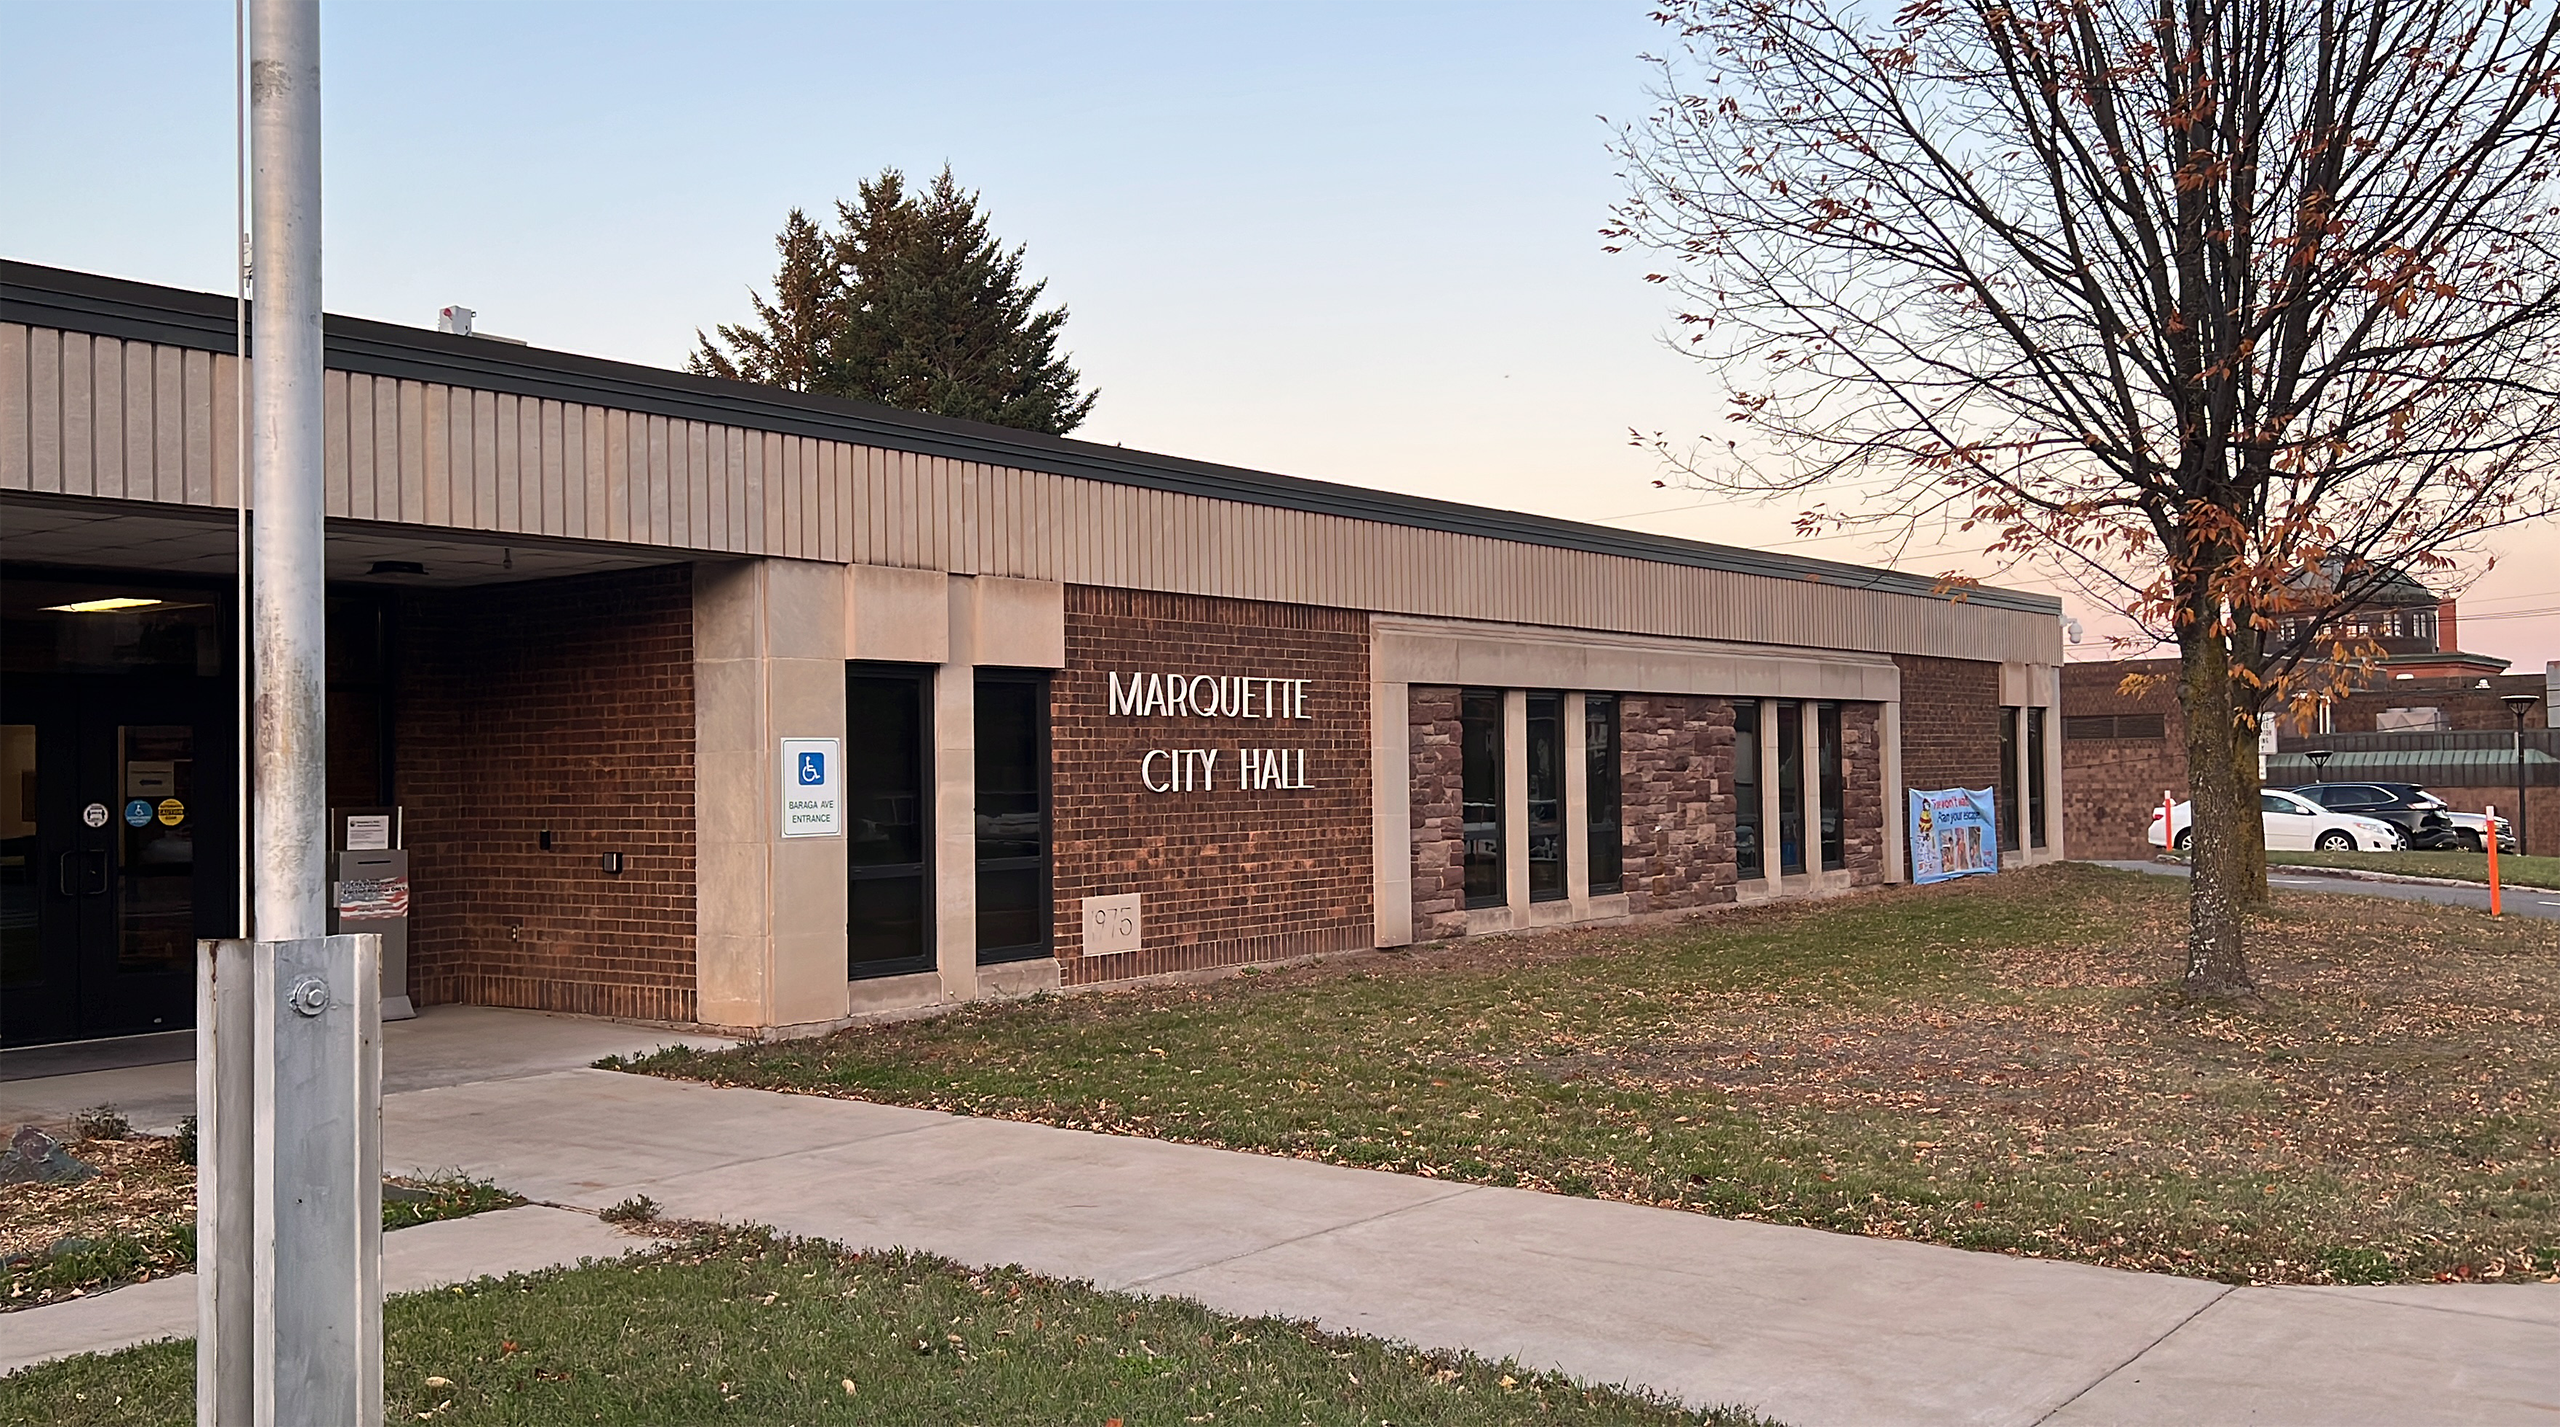 McCotter Energy Systems at Marquette City Hall